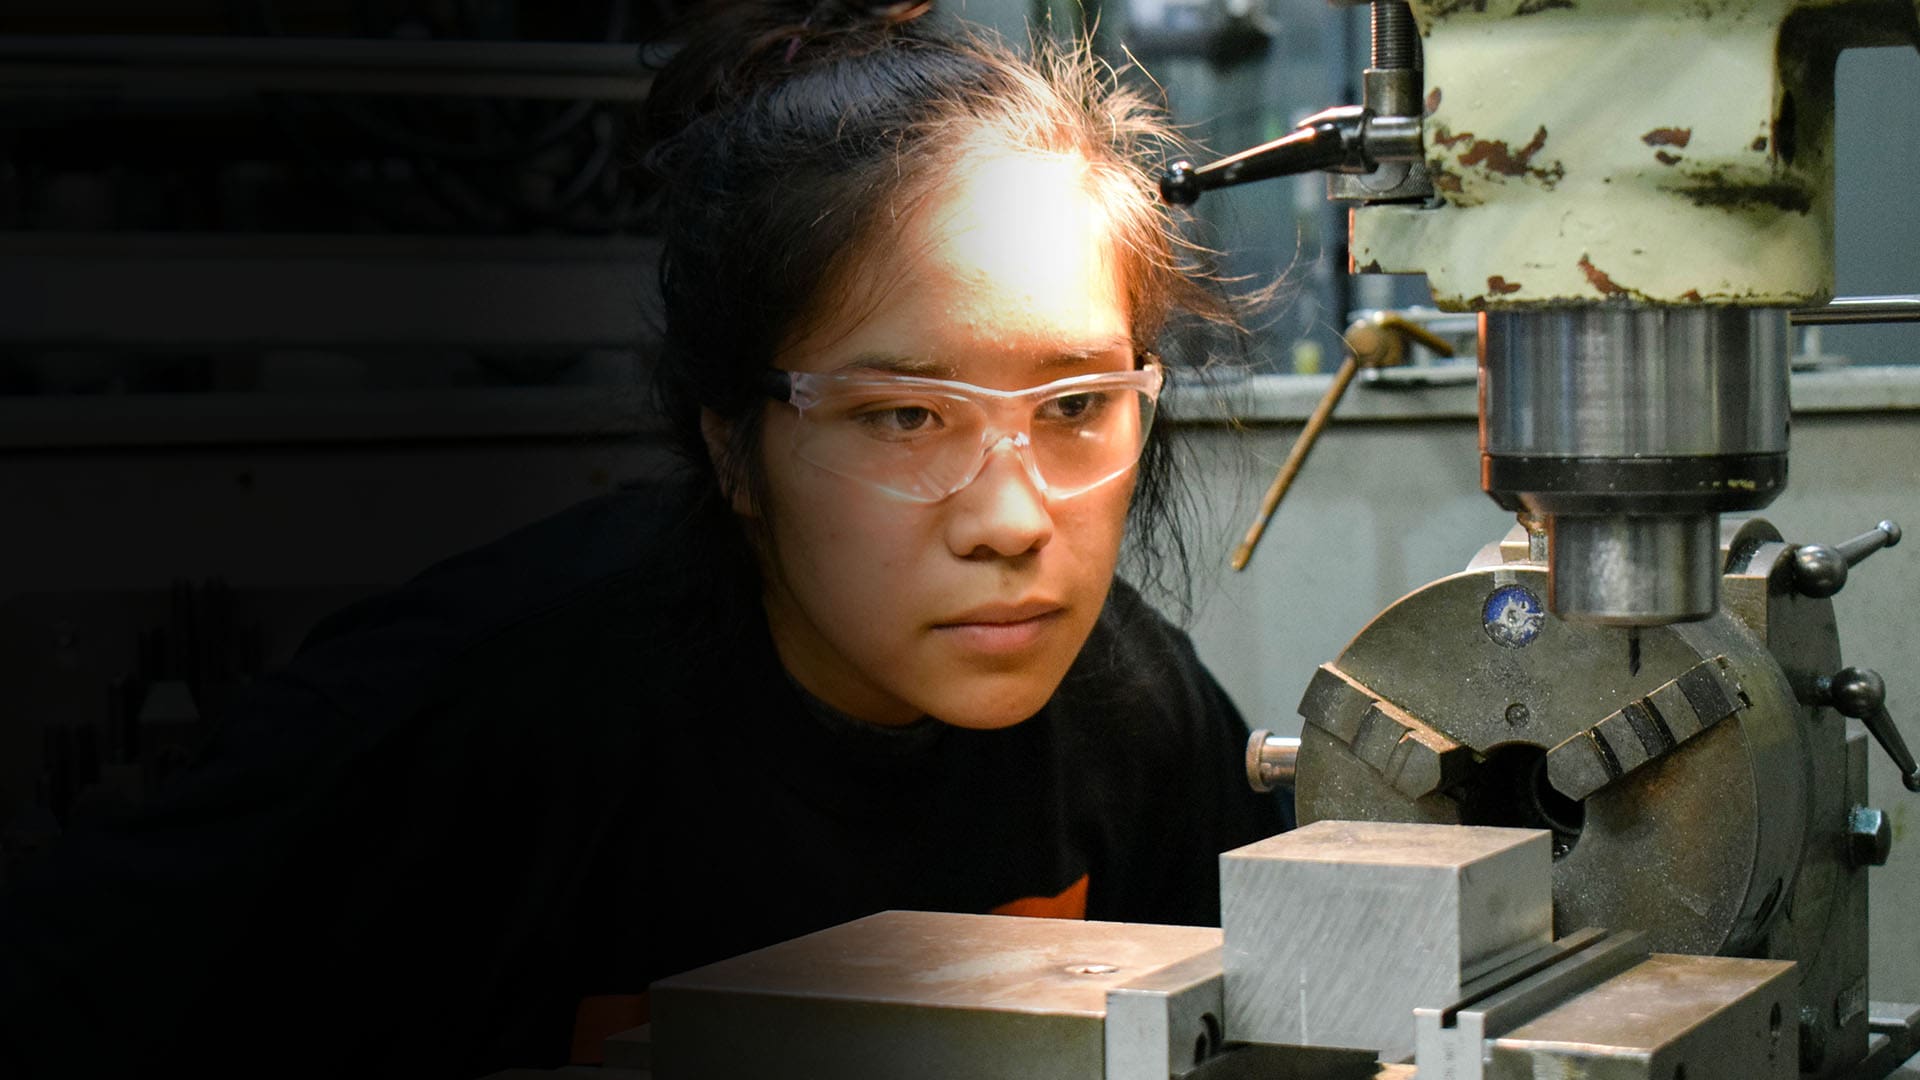 An AJAC youth apprentice uses a manual mill during her on-the-job training at Tool Gauge in Tacoma, Washington.